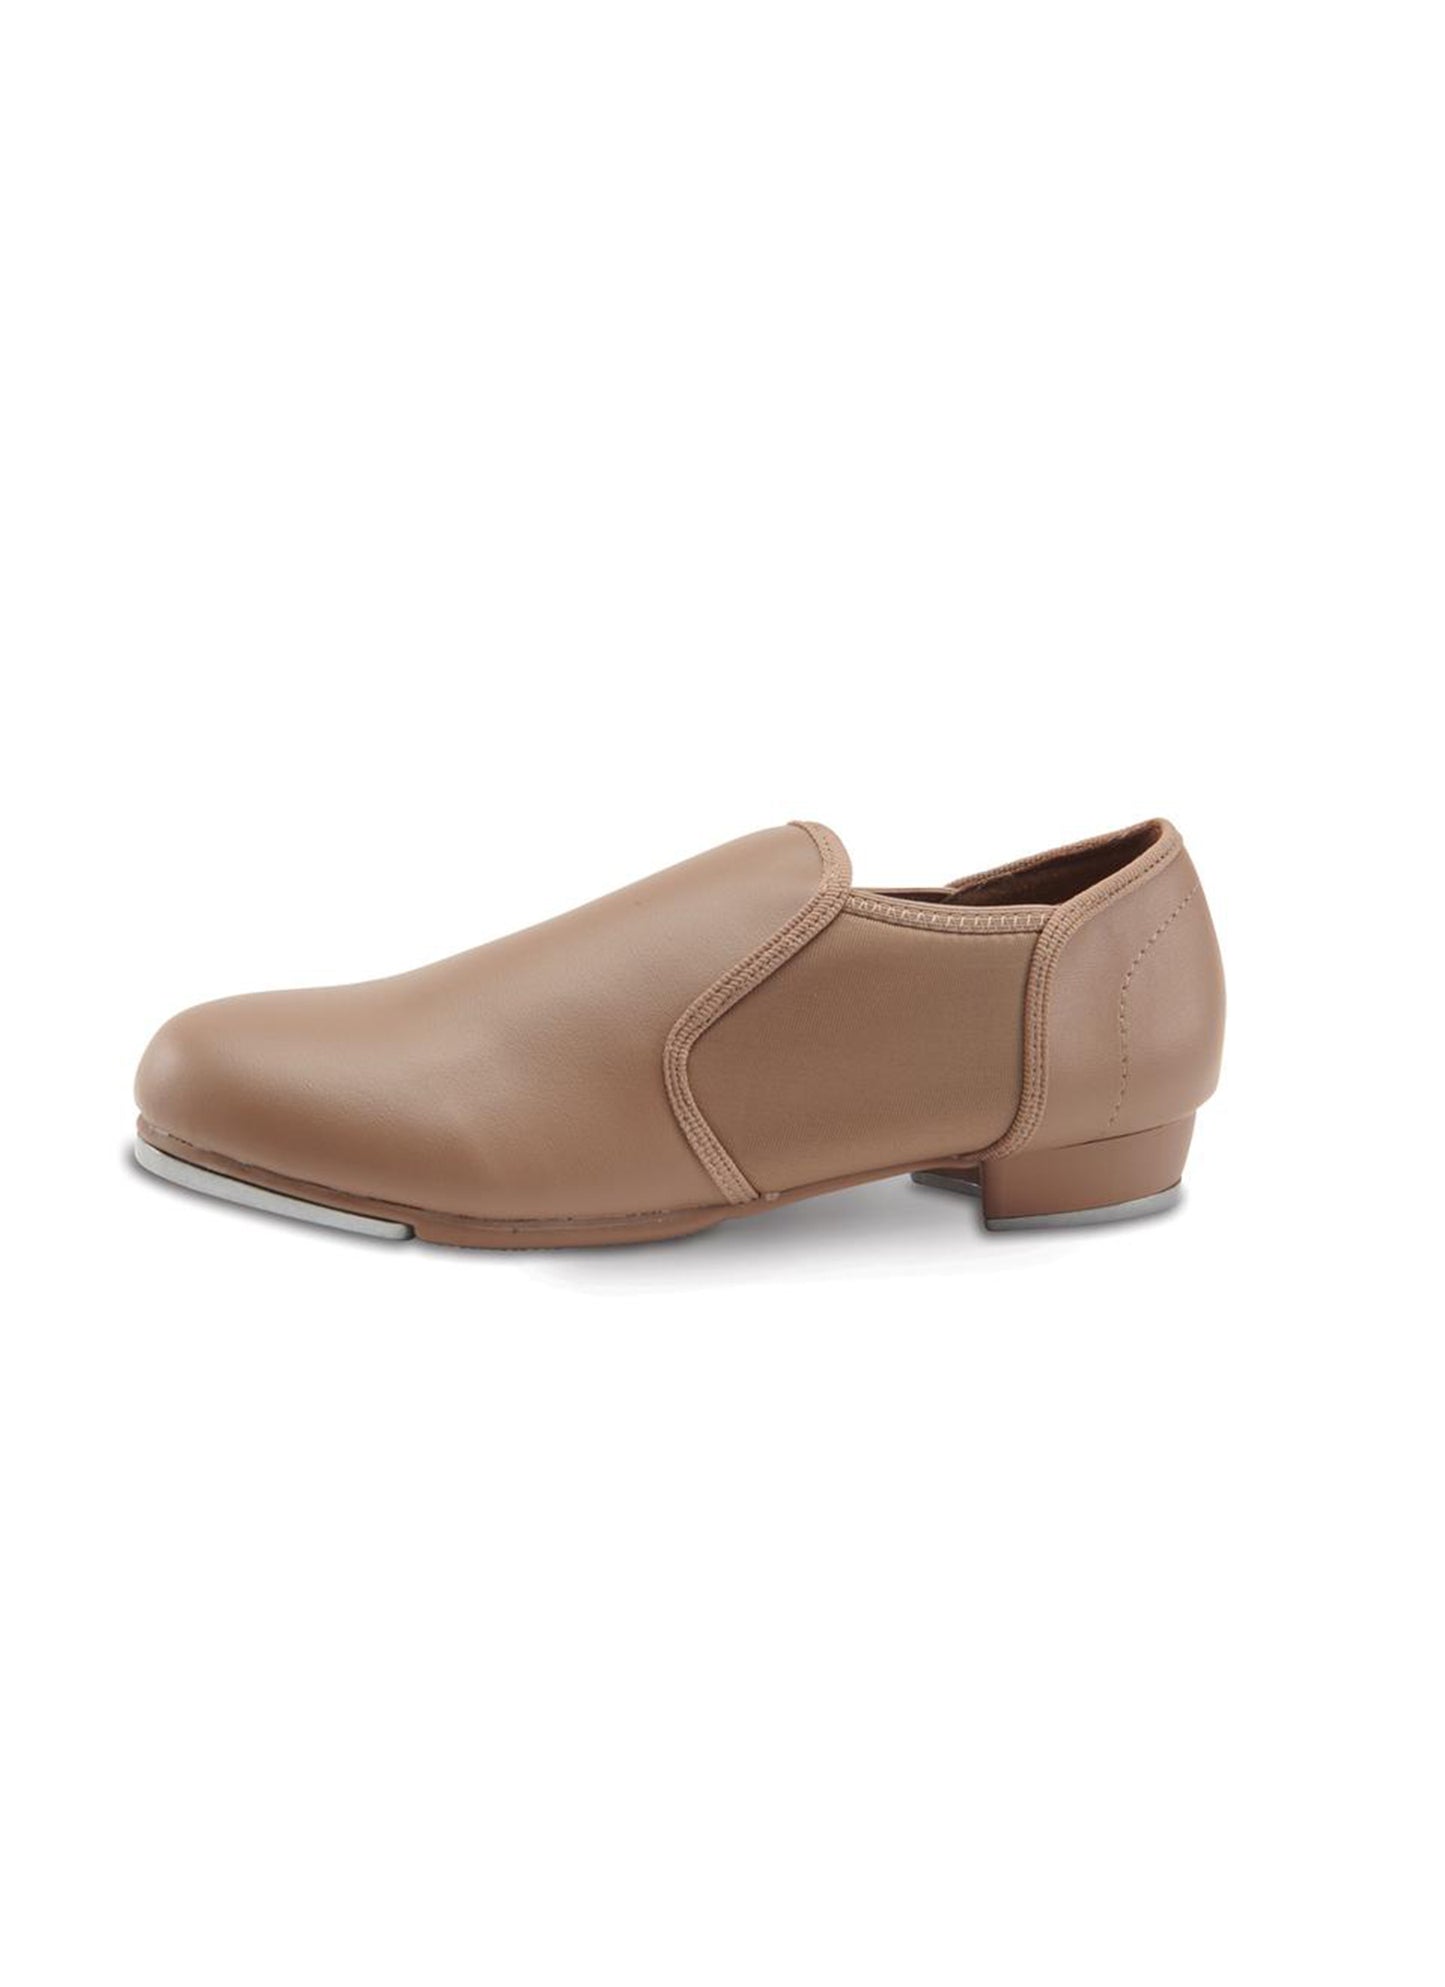 Danznmotion Slip On Tap Shoes